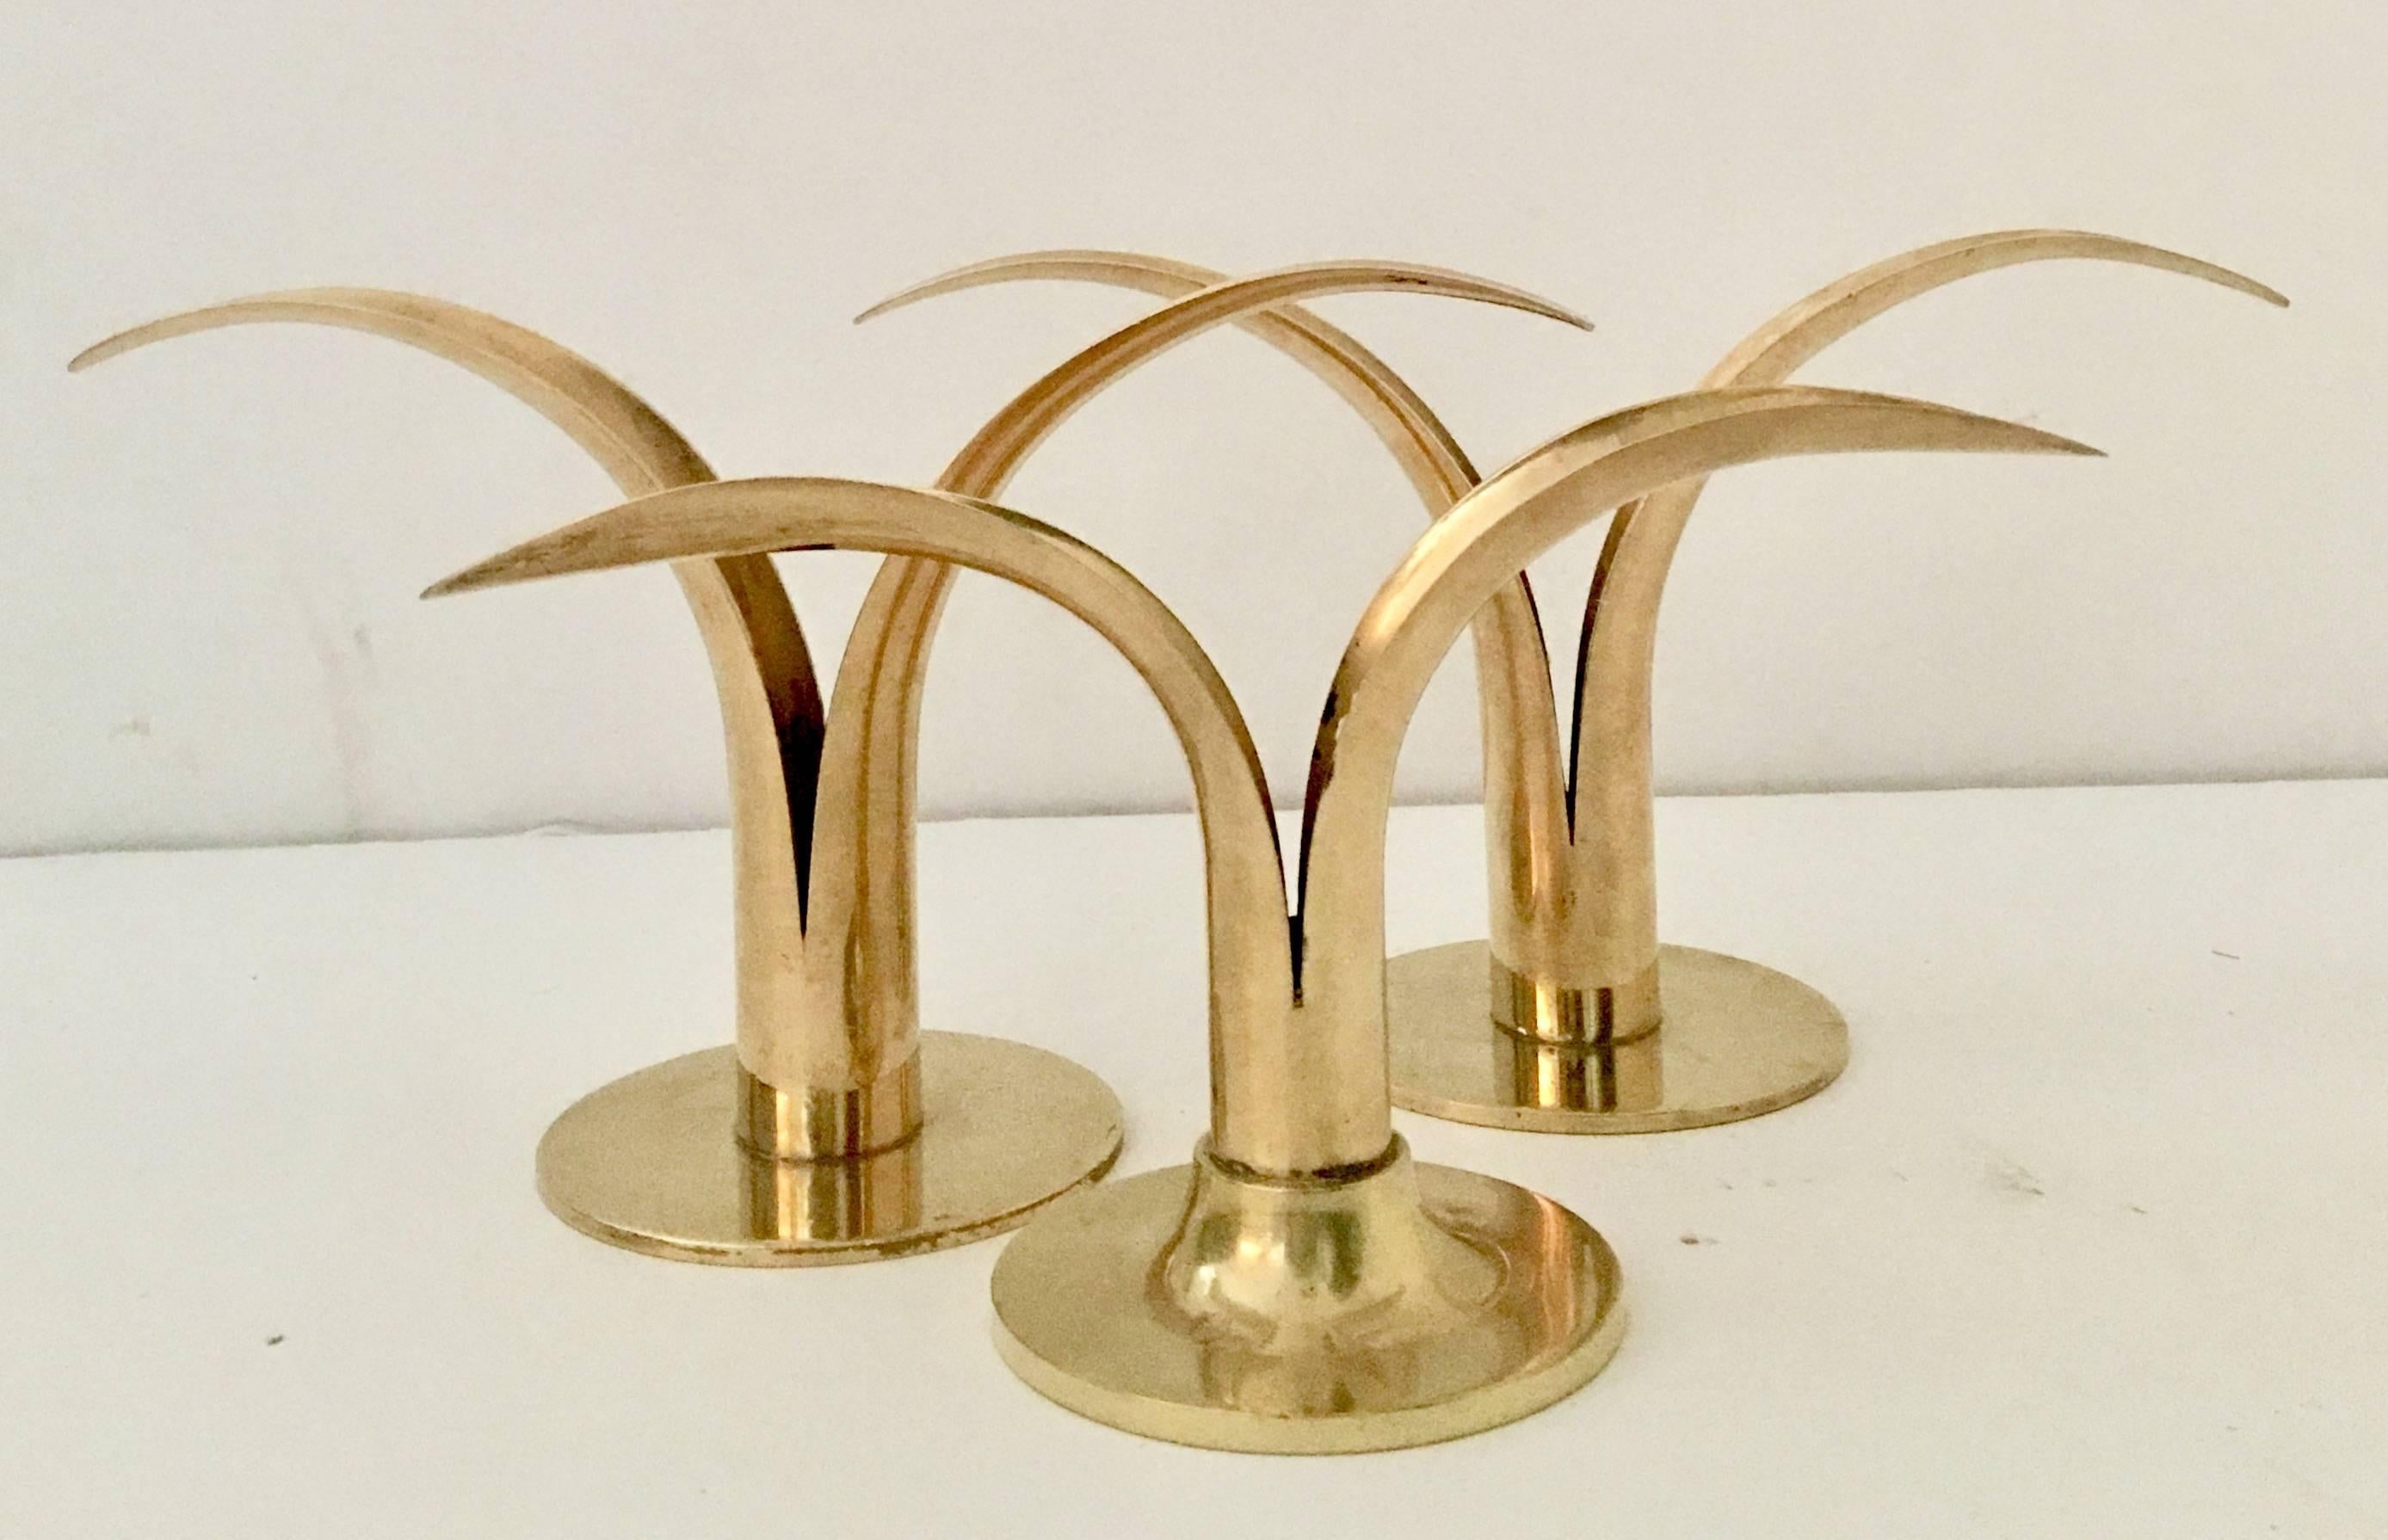 Swedish set of three solid brass Mid-Century Modern "Lily" candlestick holders.
Set includes two large and one a bit smaller. The two large pieces are signed on the underside, Ystad-Metall Made In Sweden. The smaller of the three is